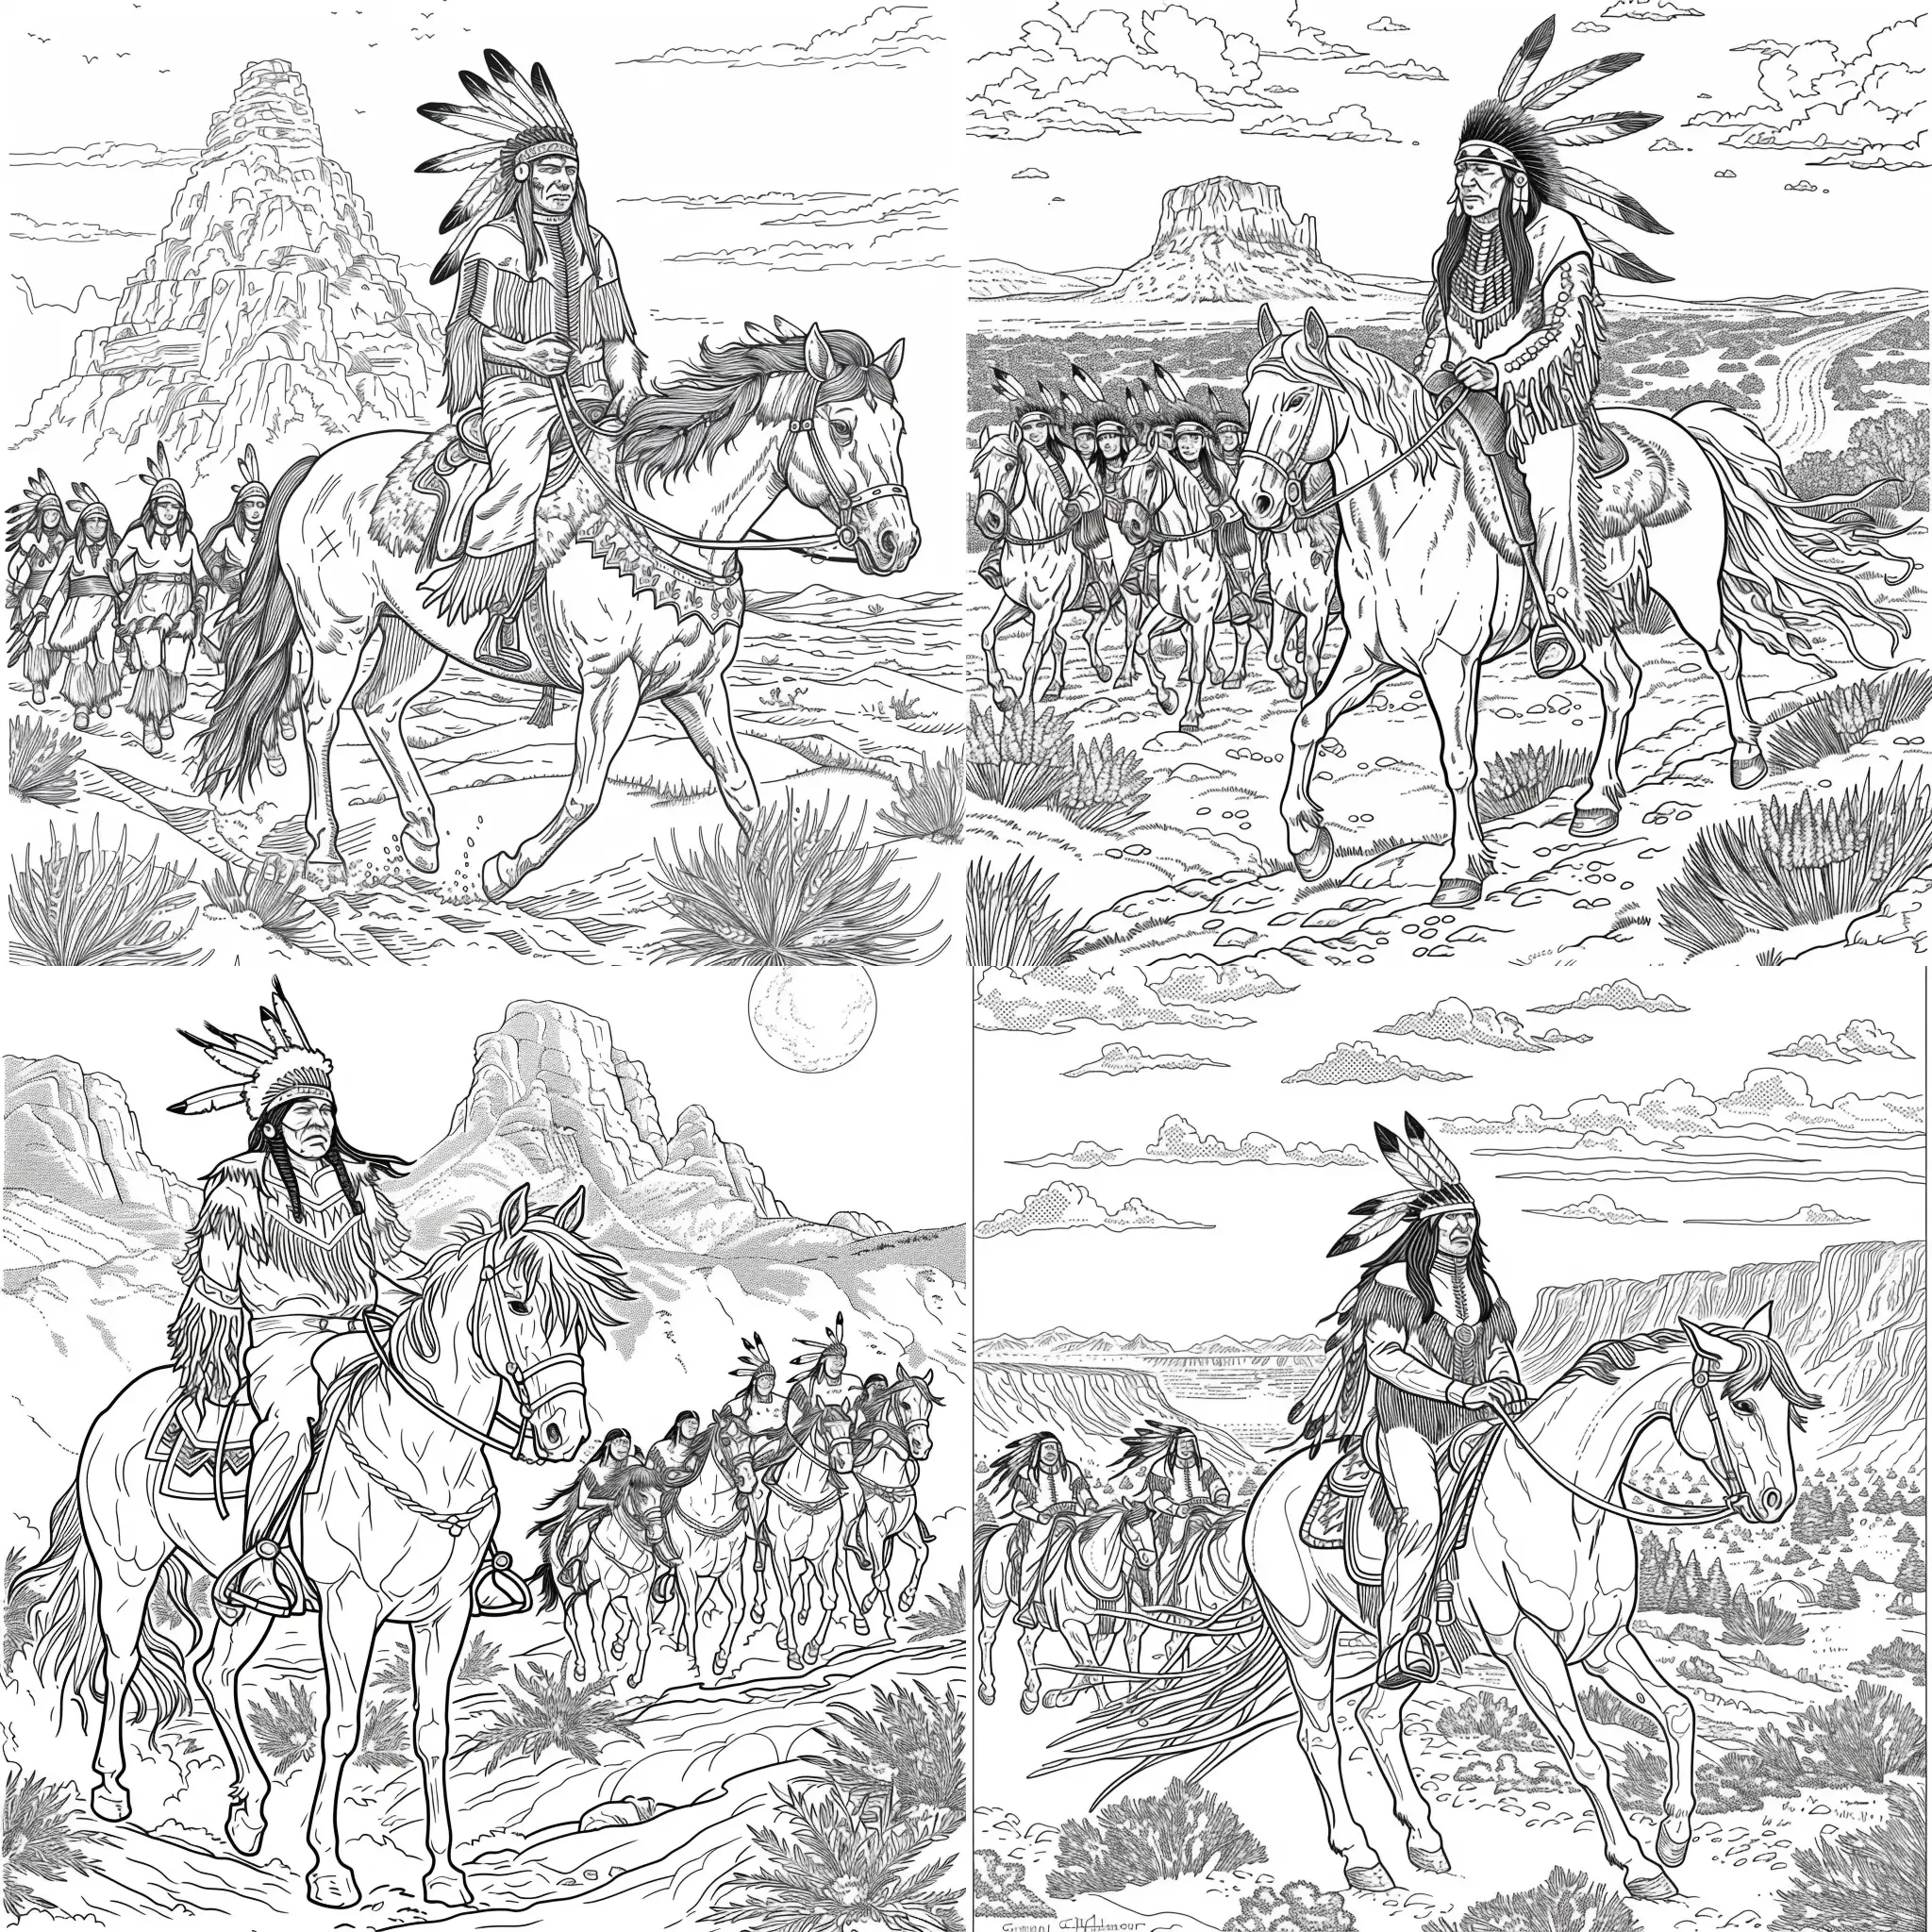 Create a coloring book page of a proud Native American Chief on his horse leading his people across the plains, no background